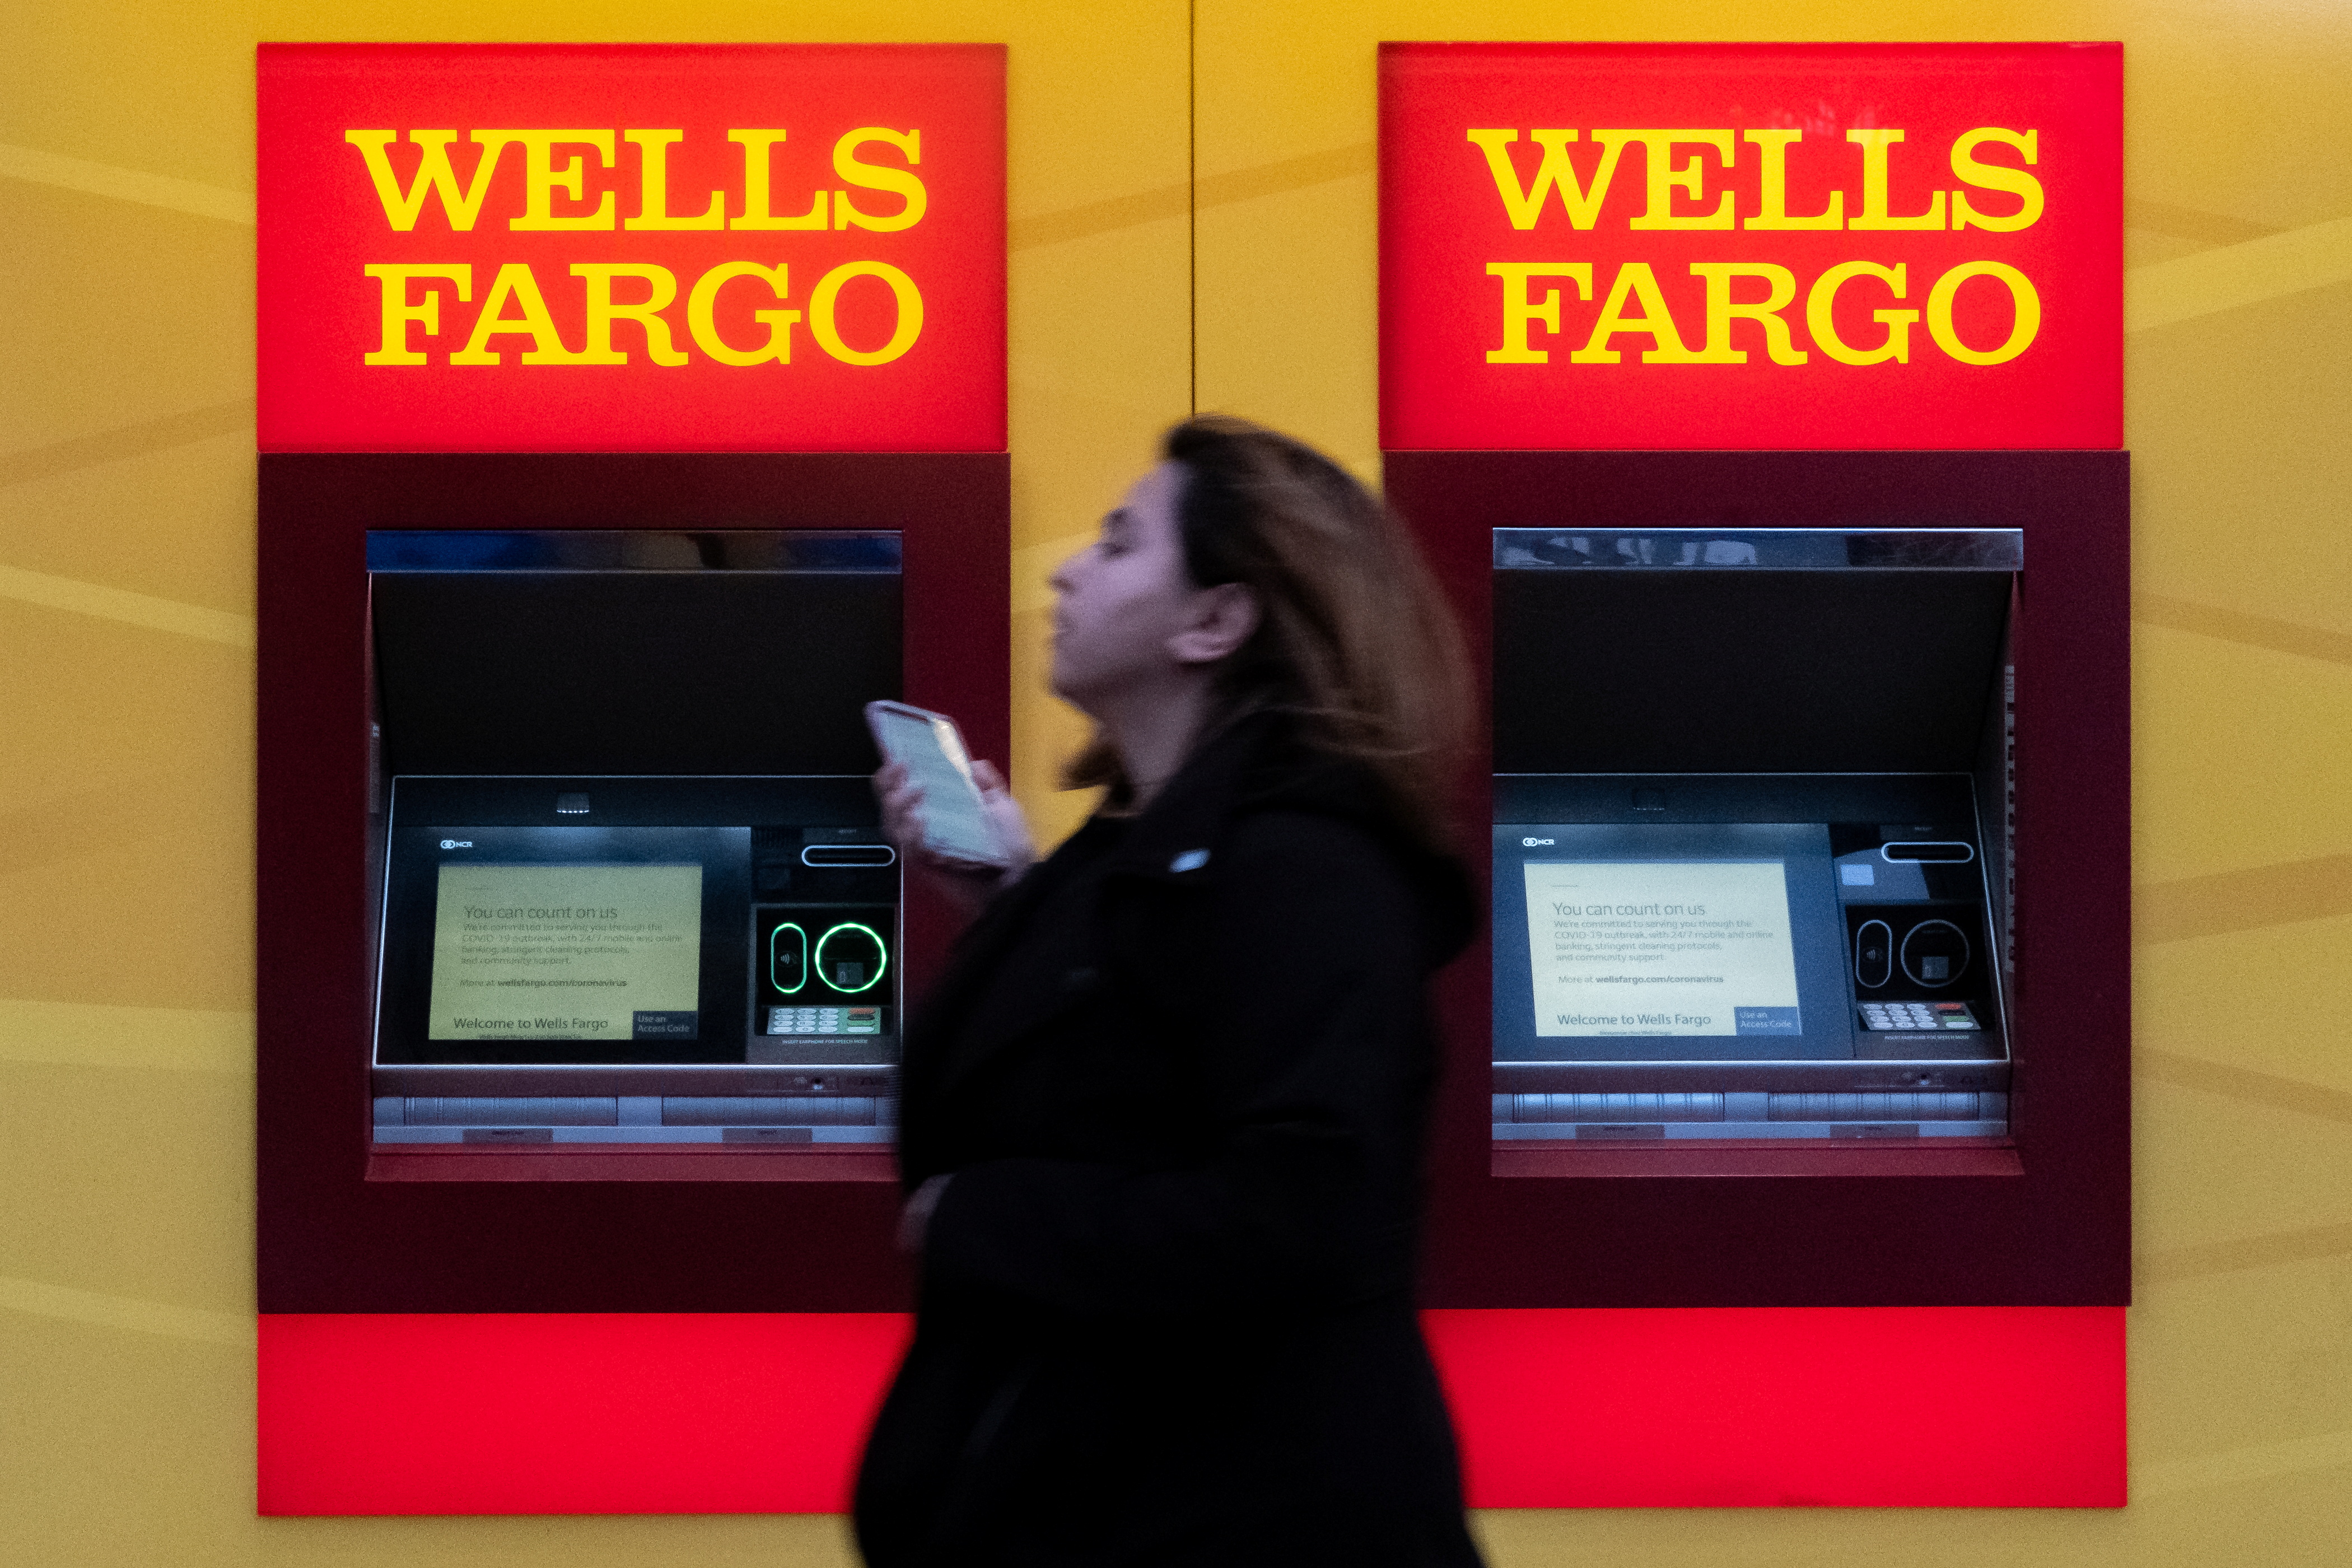 You can't buy bitcoin with Wells Fargo credit cards anymore